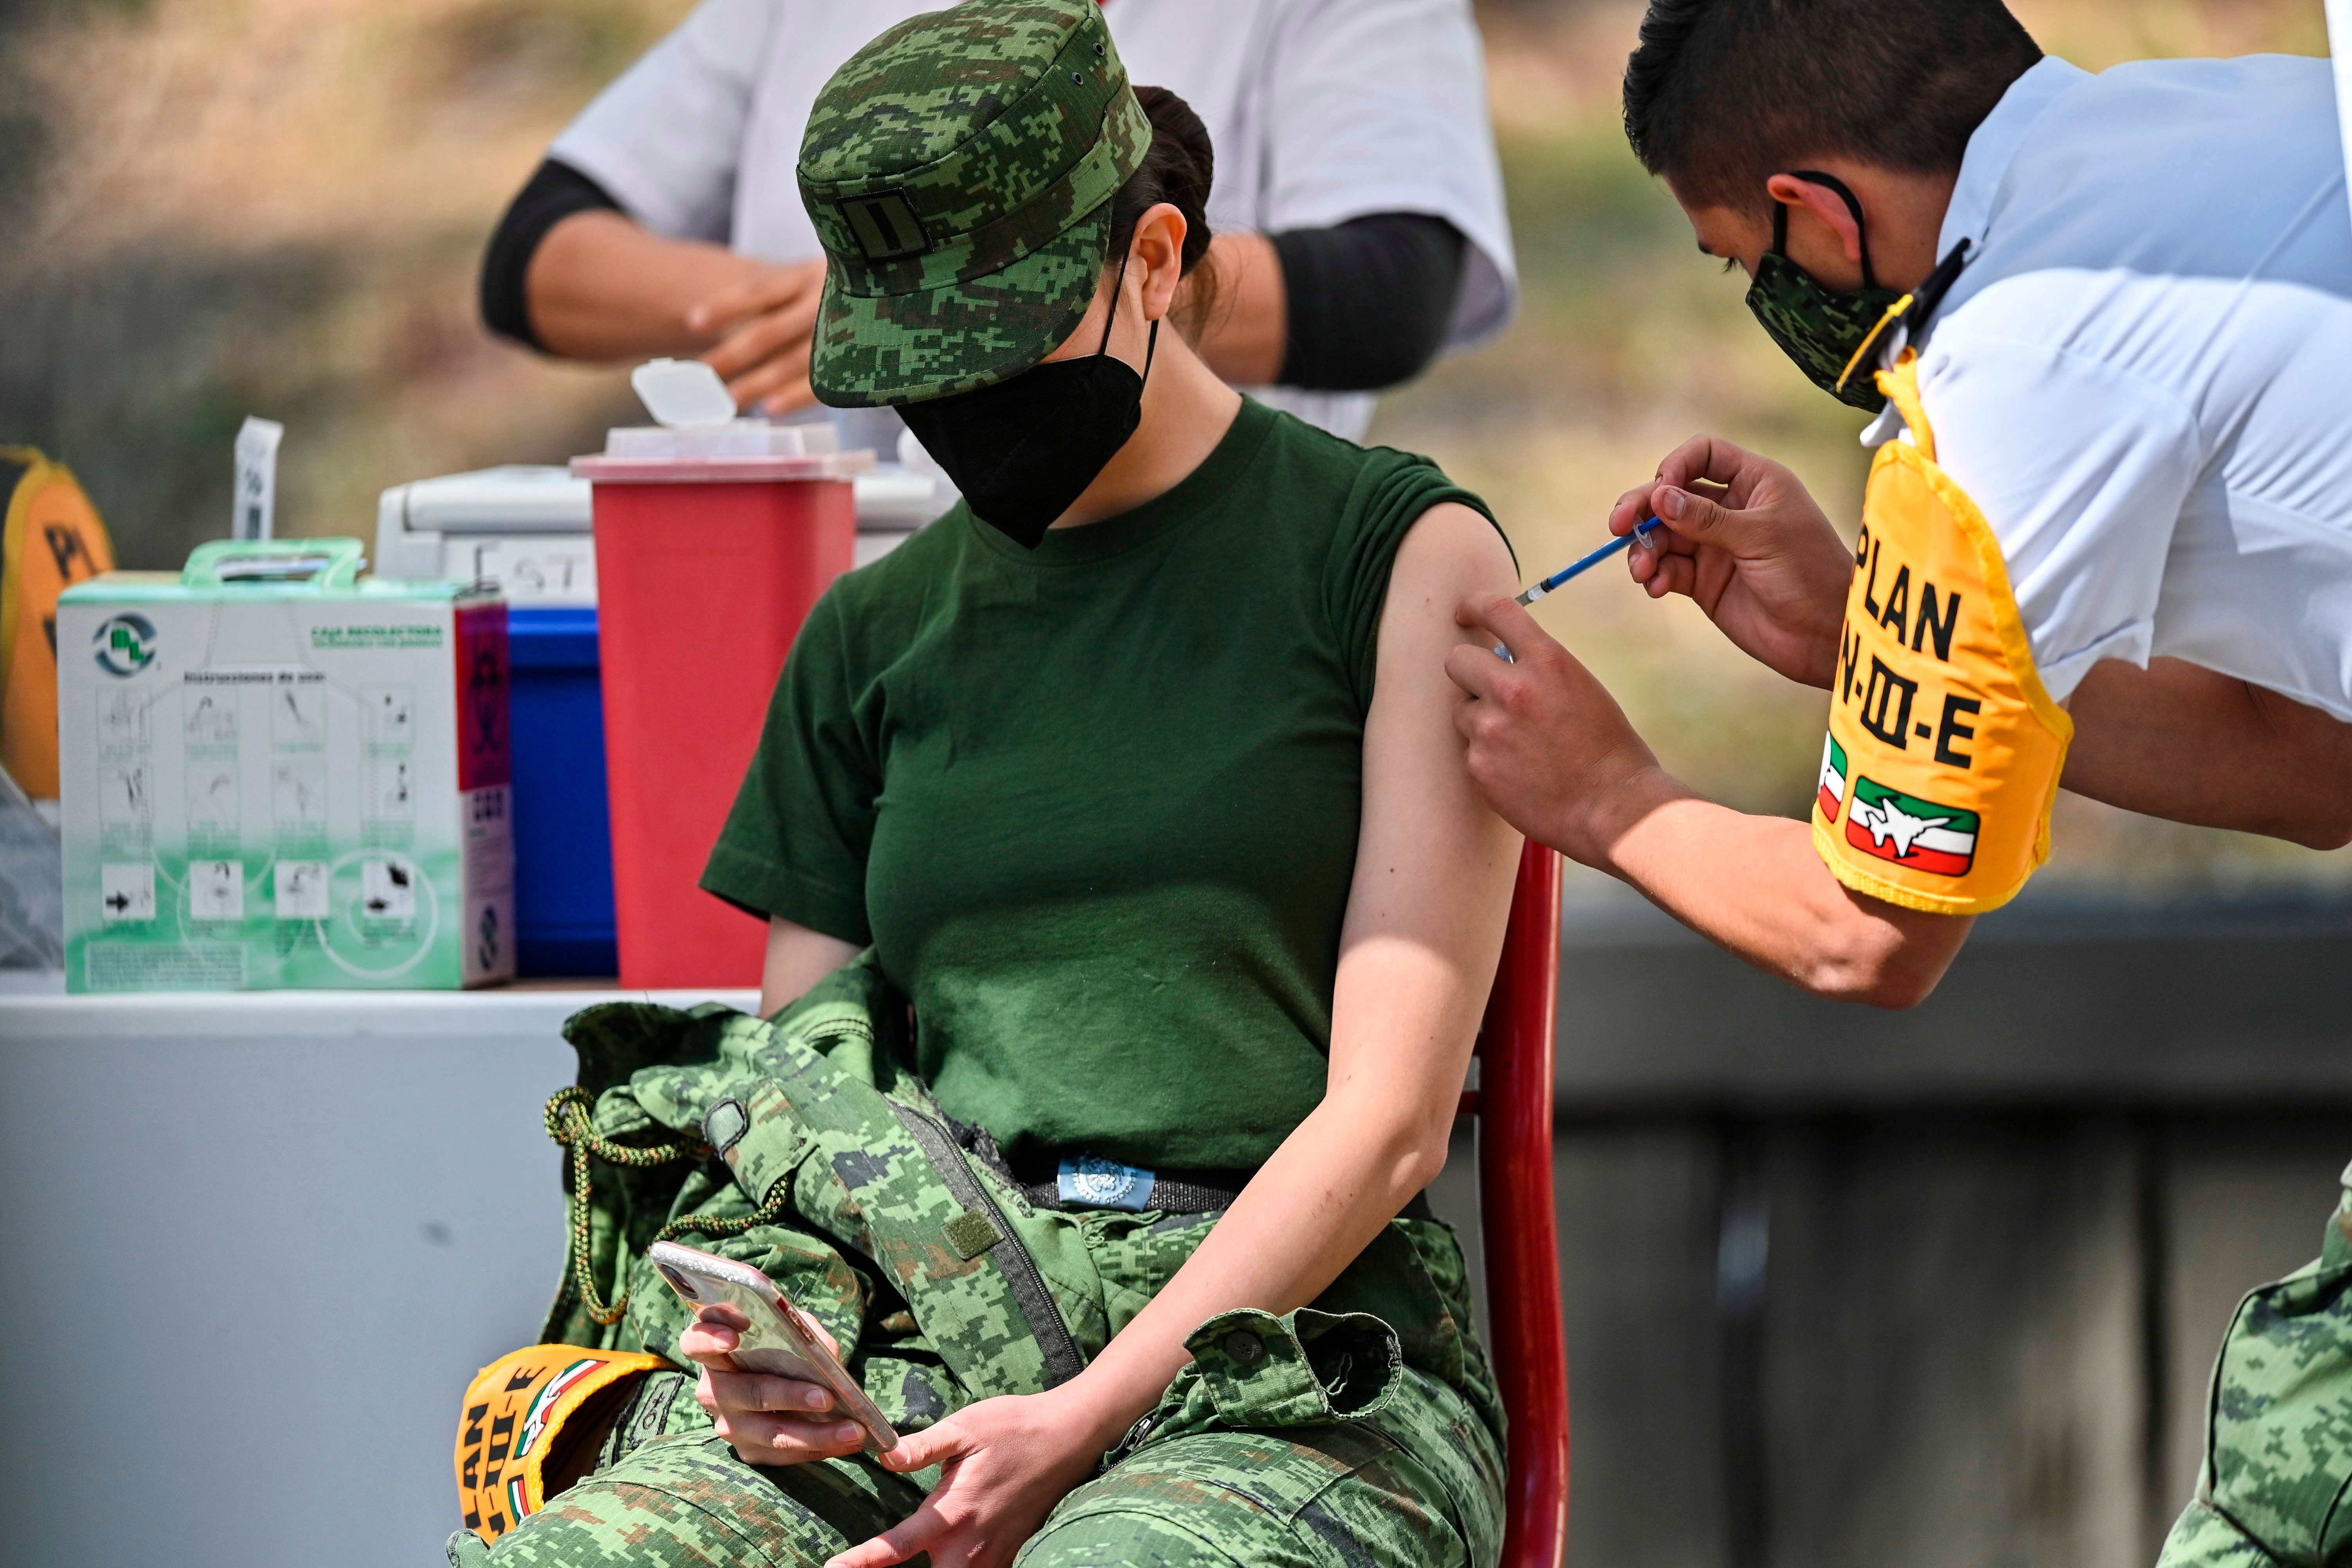 A Mexican military medical receives the Pfizer/BioNTech Covid-19 vaccine jab, at the Military College in Mexico City, on December 27, 2020. - Dozens of nurses and doctors felt they had regained "peace of mind" and strength to continue fighting the COVID-19 pandemic, after being vaccinated against the disease in Mexico. Credit: AFP